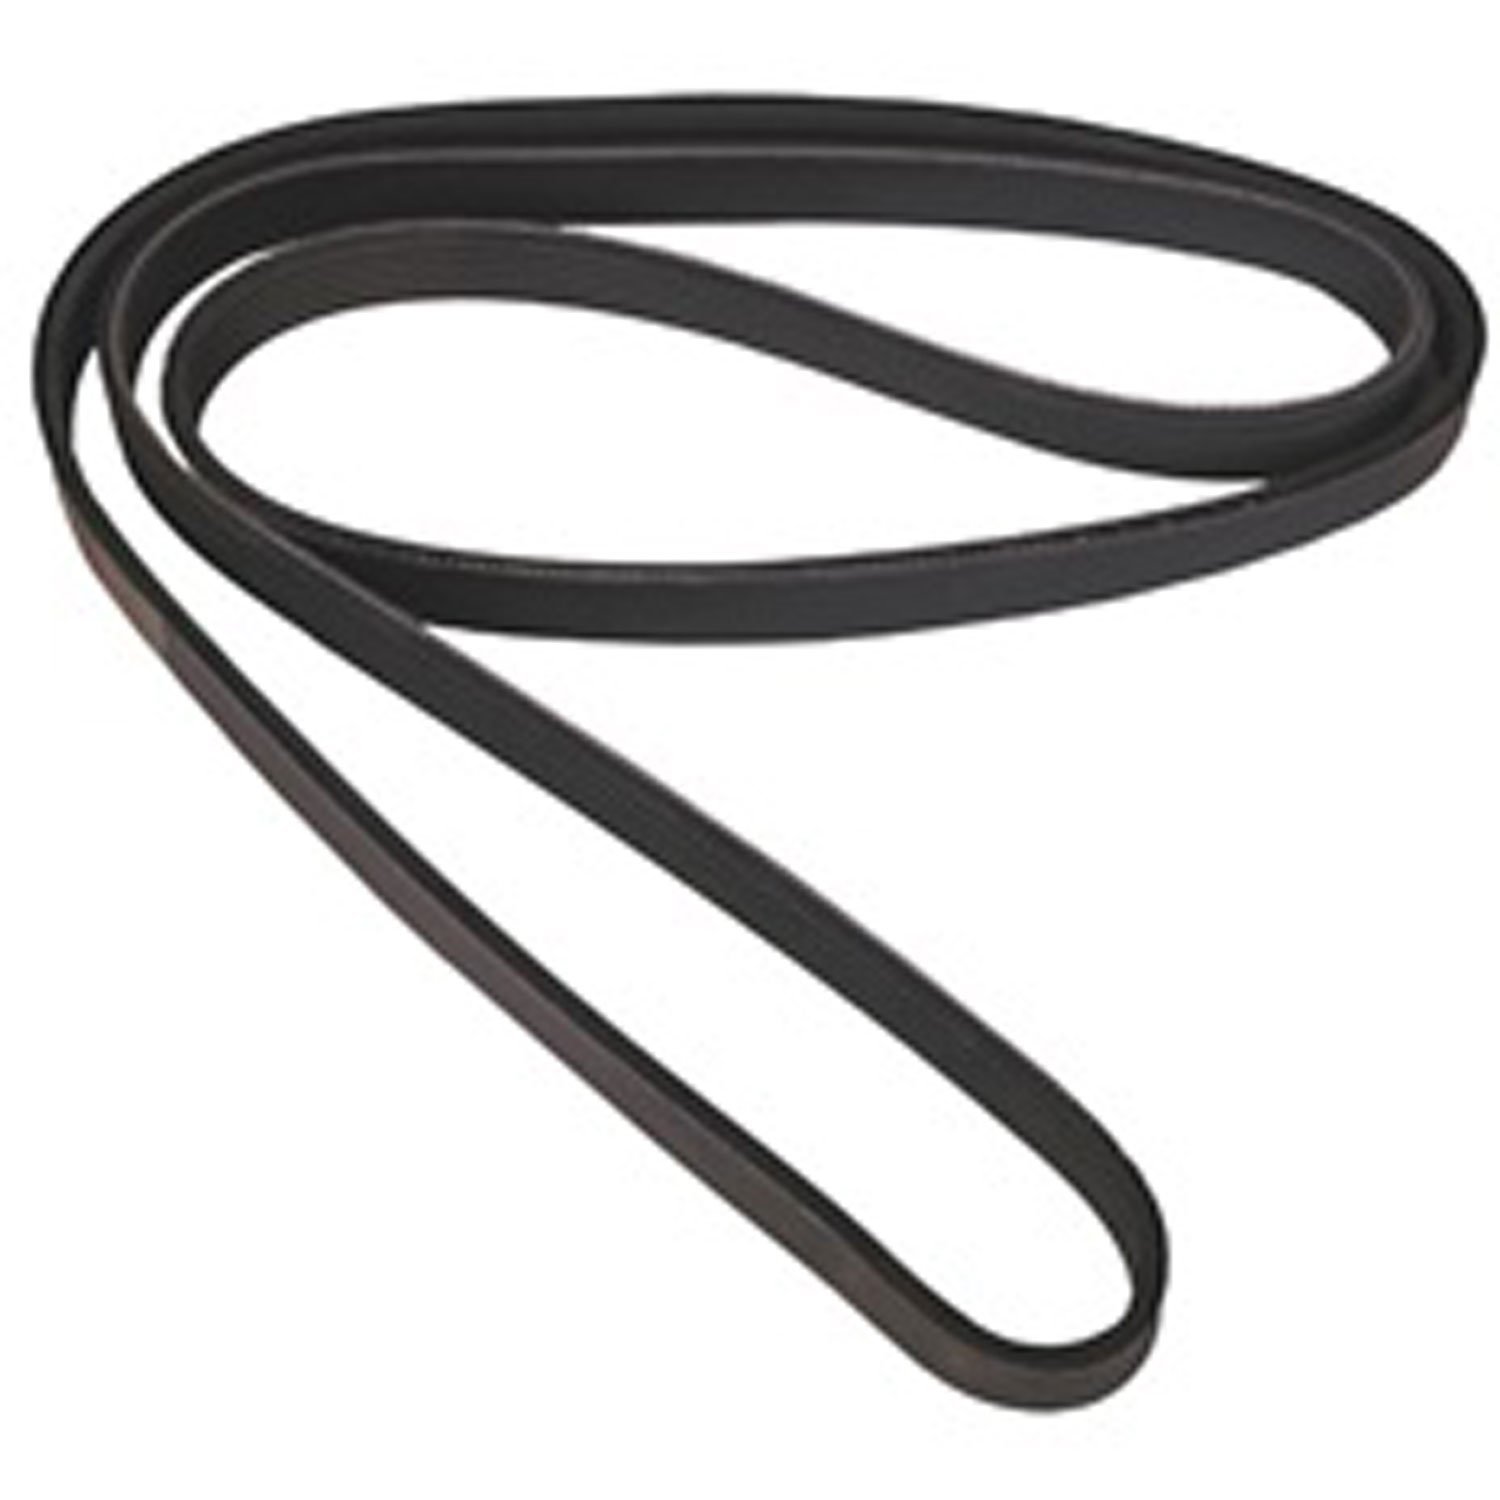 Serpentine Belt for 1987-1990 Jeep YJ Wrangler with 258 cu in. 6-cylinder Engine and Power Steering